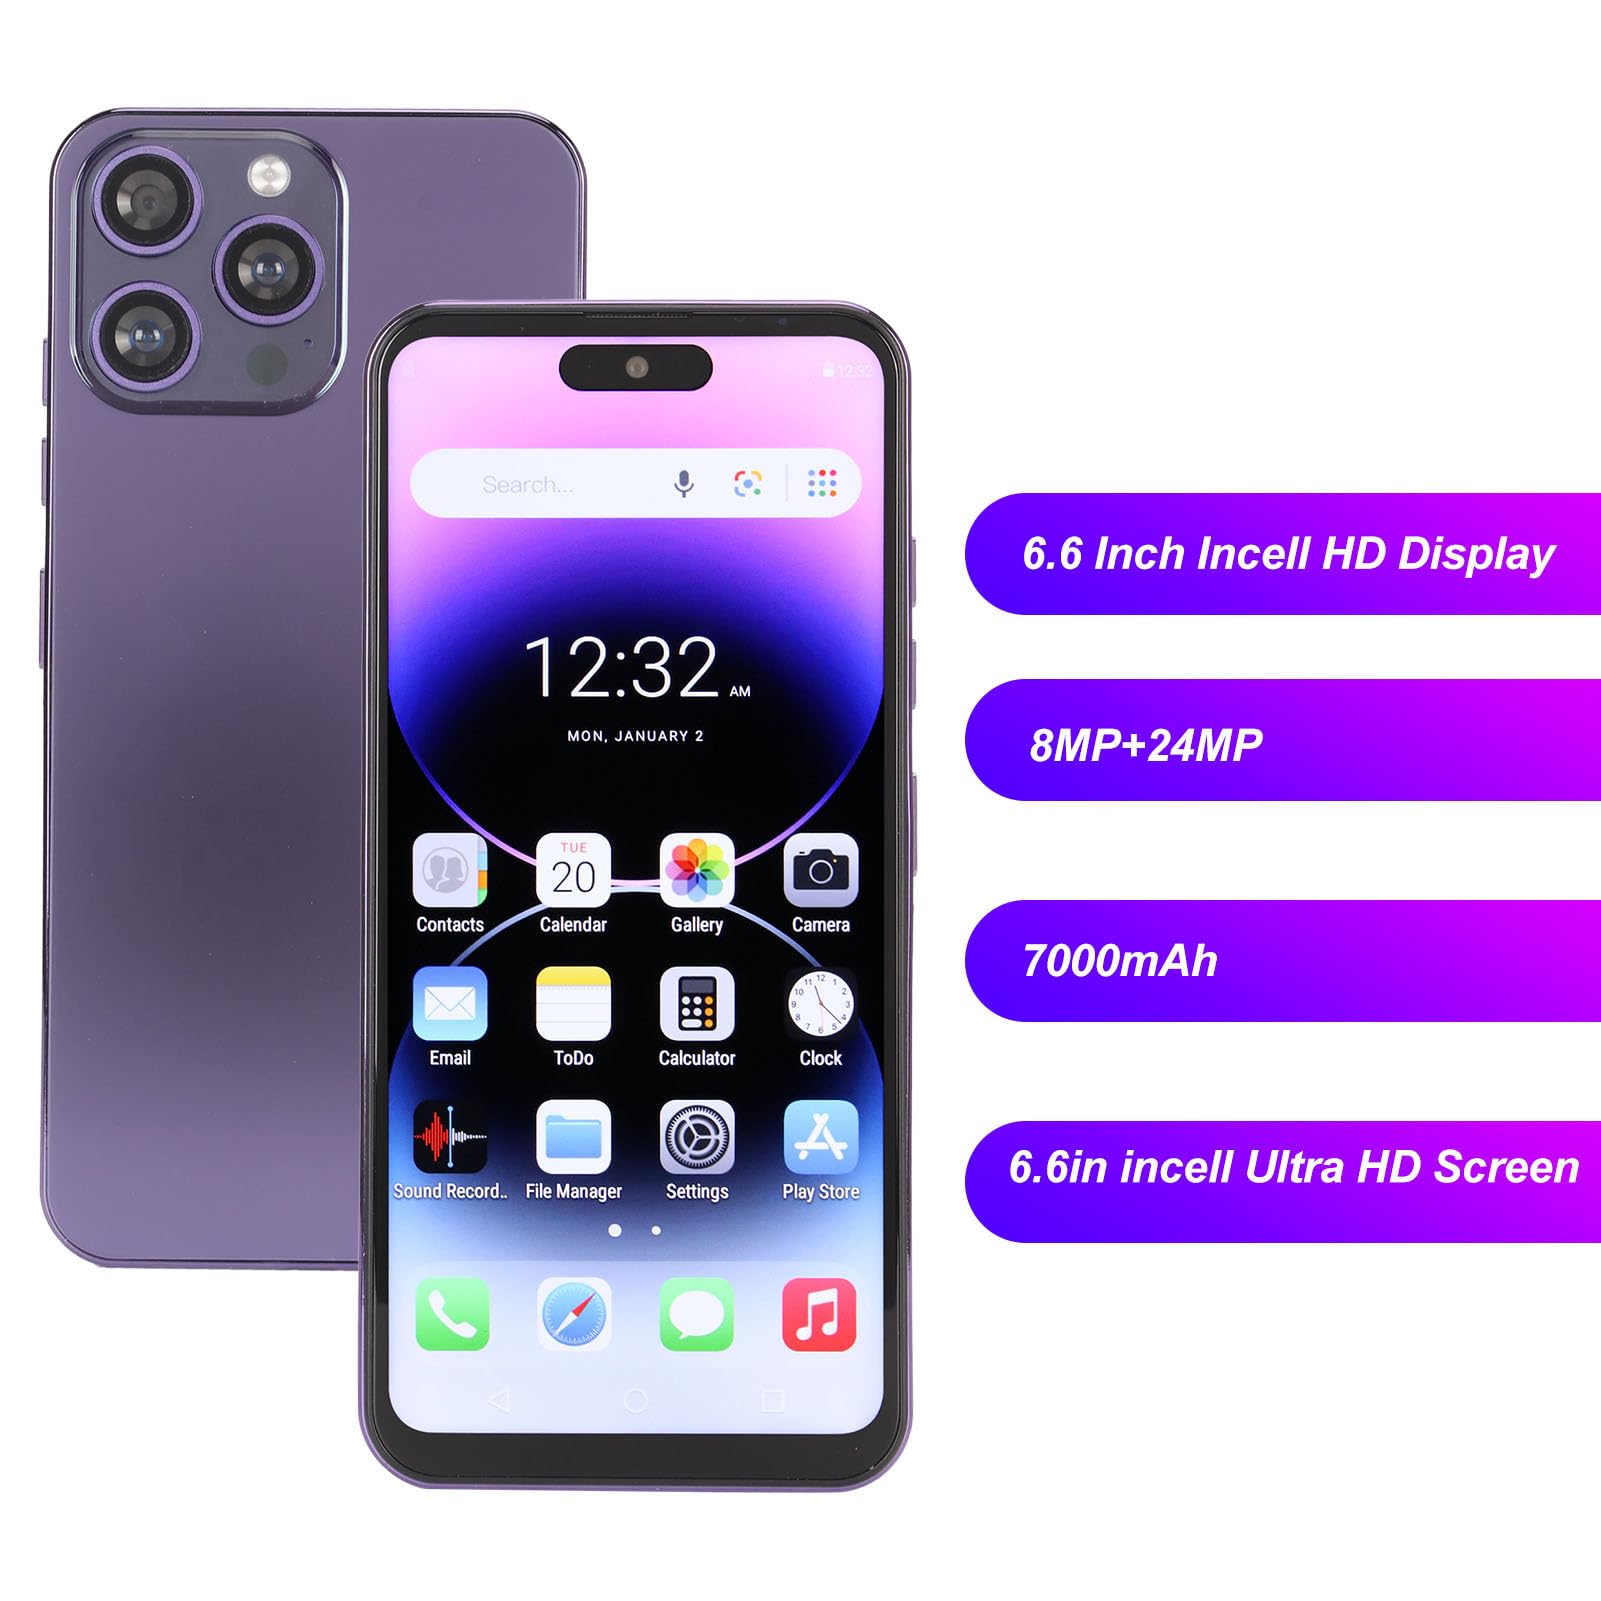 Tangxi 4G Unlock Cellphone, 6.6inch 2520 x 3088 HD Touchscreen, Android13 Smartphone, 8GB RAM 256GB ROM, 8MP 24MP Dual Cameras, 7000mAh, with WiFi, BT, FM and GPS, Gifts (North America